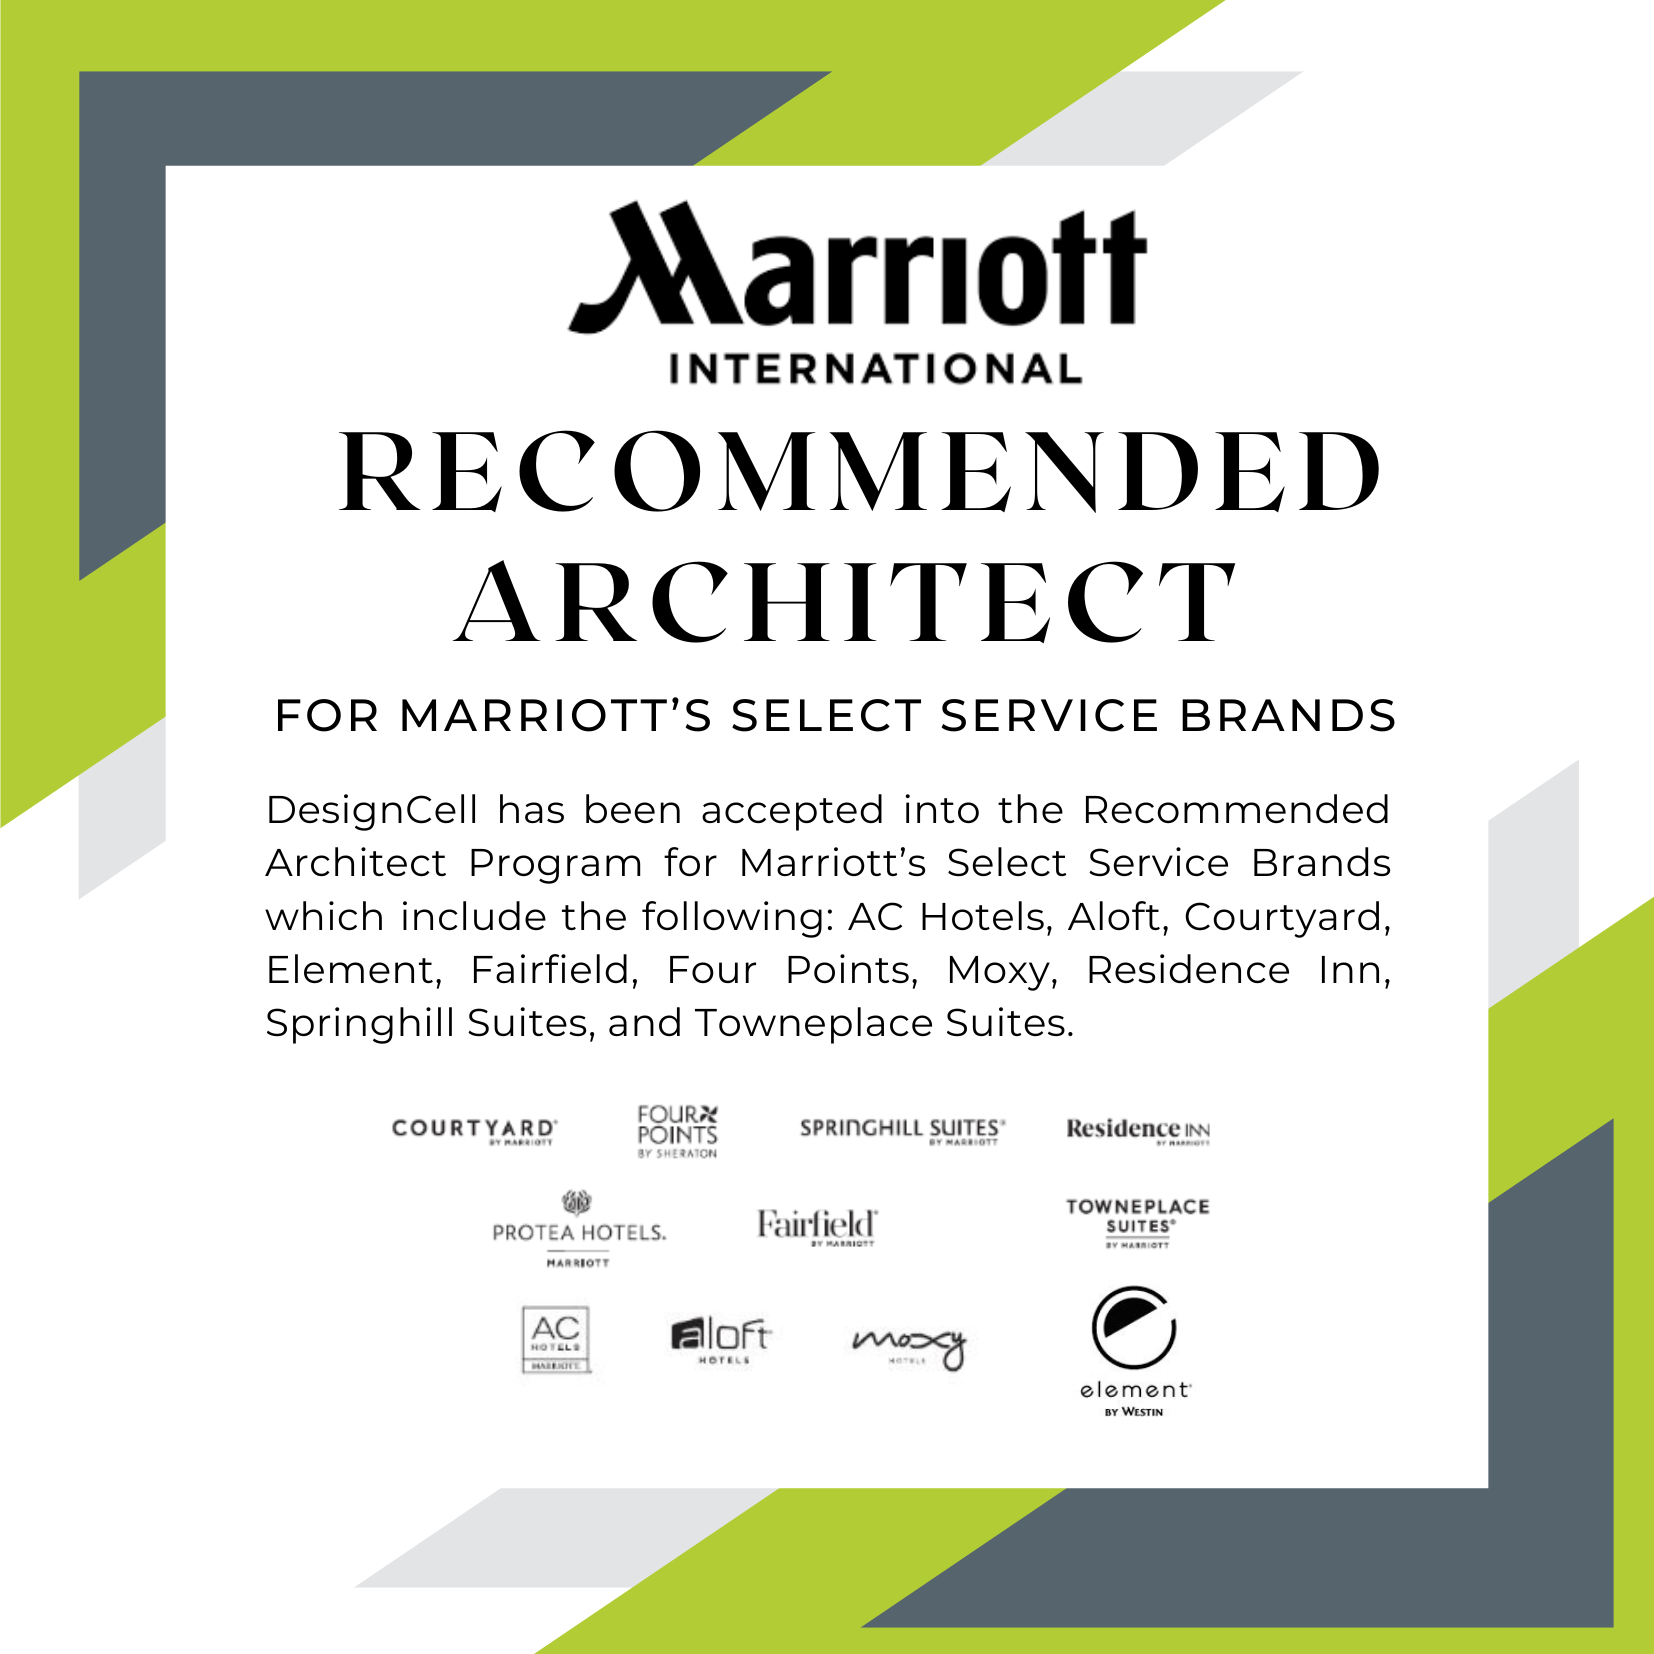 DesignCell Architecture Selected as Marriott Recommended Architect